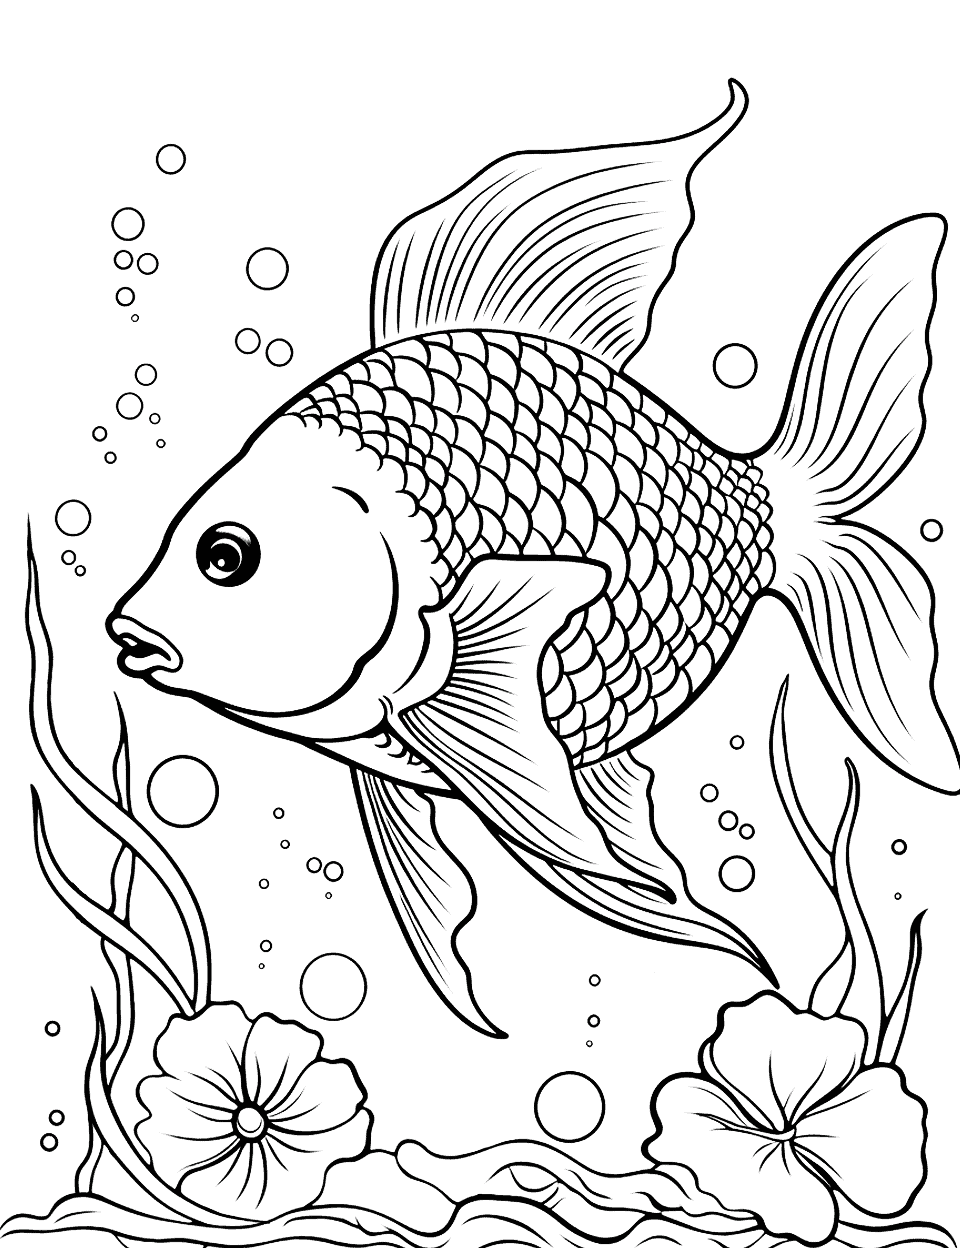 Fairy Fish in Enchanted Waters Coloring Page - Fish with wings, swimming in an enchanted pond.